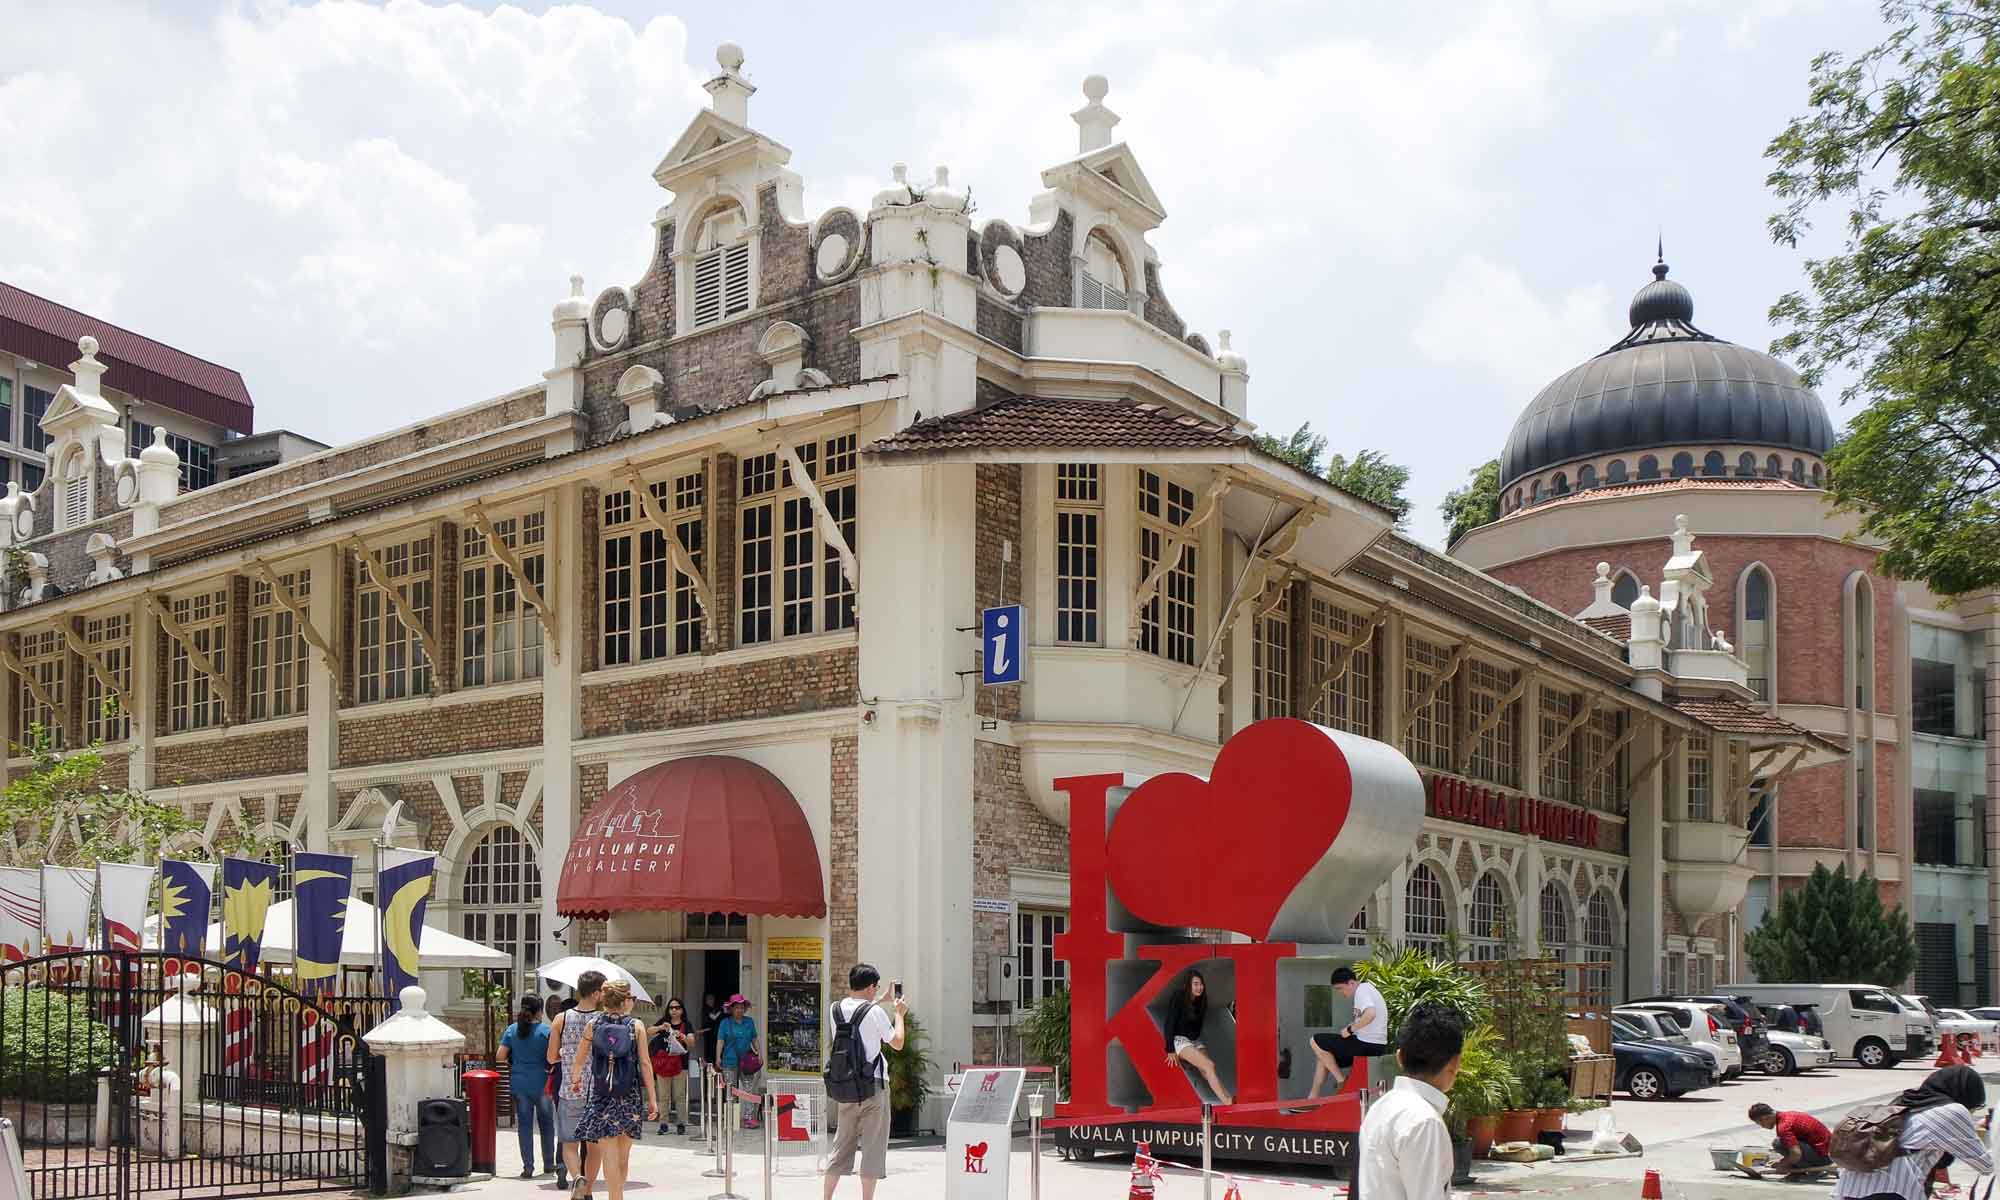 KL City Gallery and the “I Love KL” sign.